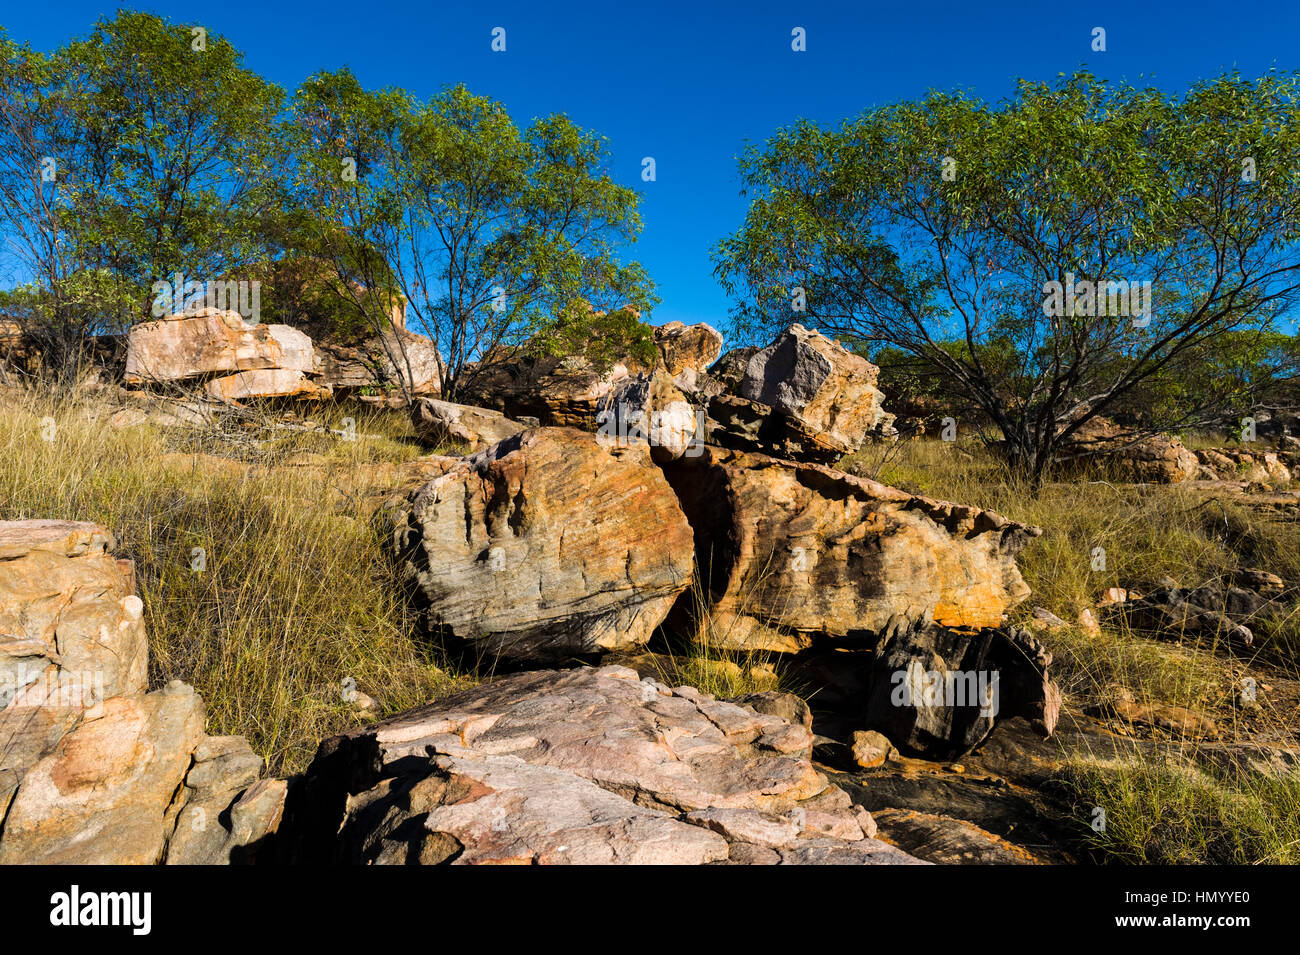 Boulders on the rocky foreshore of remote desert island. Stock Photo